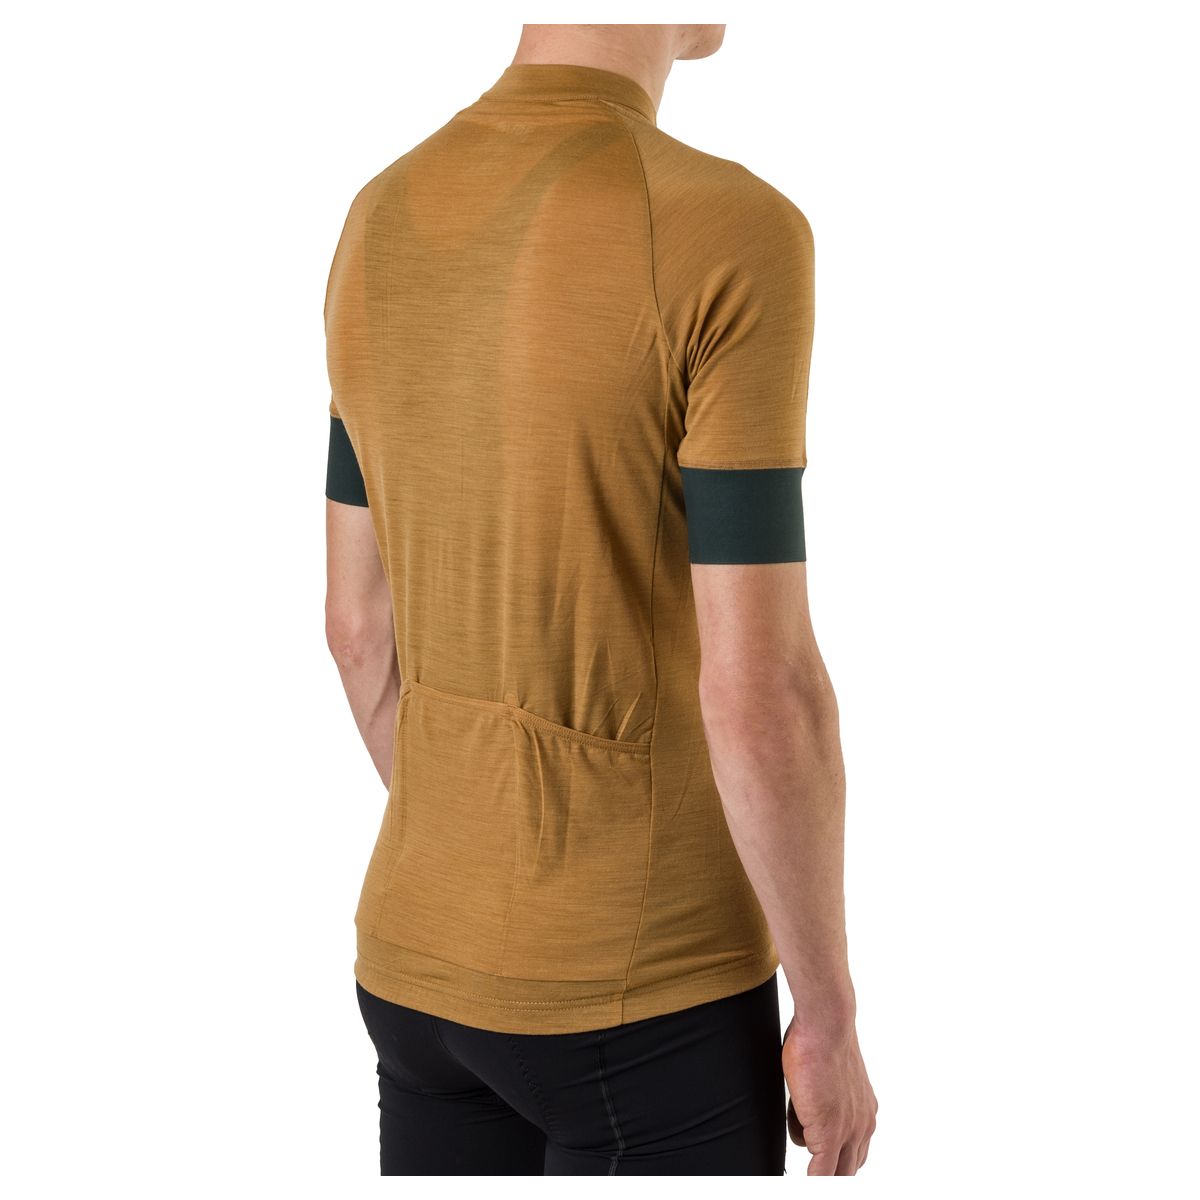 Solid Merino Maillot II SIX6 Hombres fit example